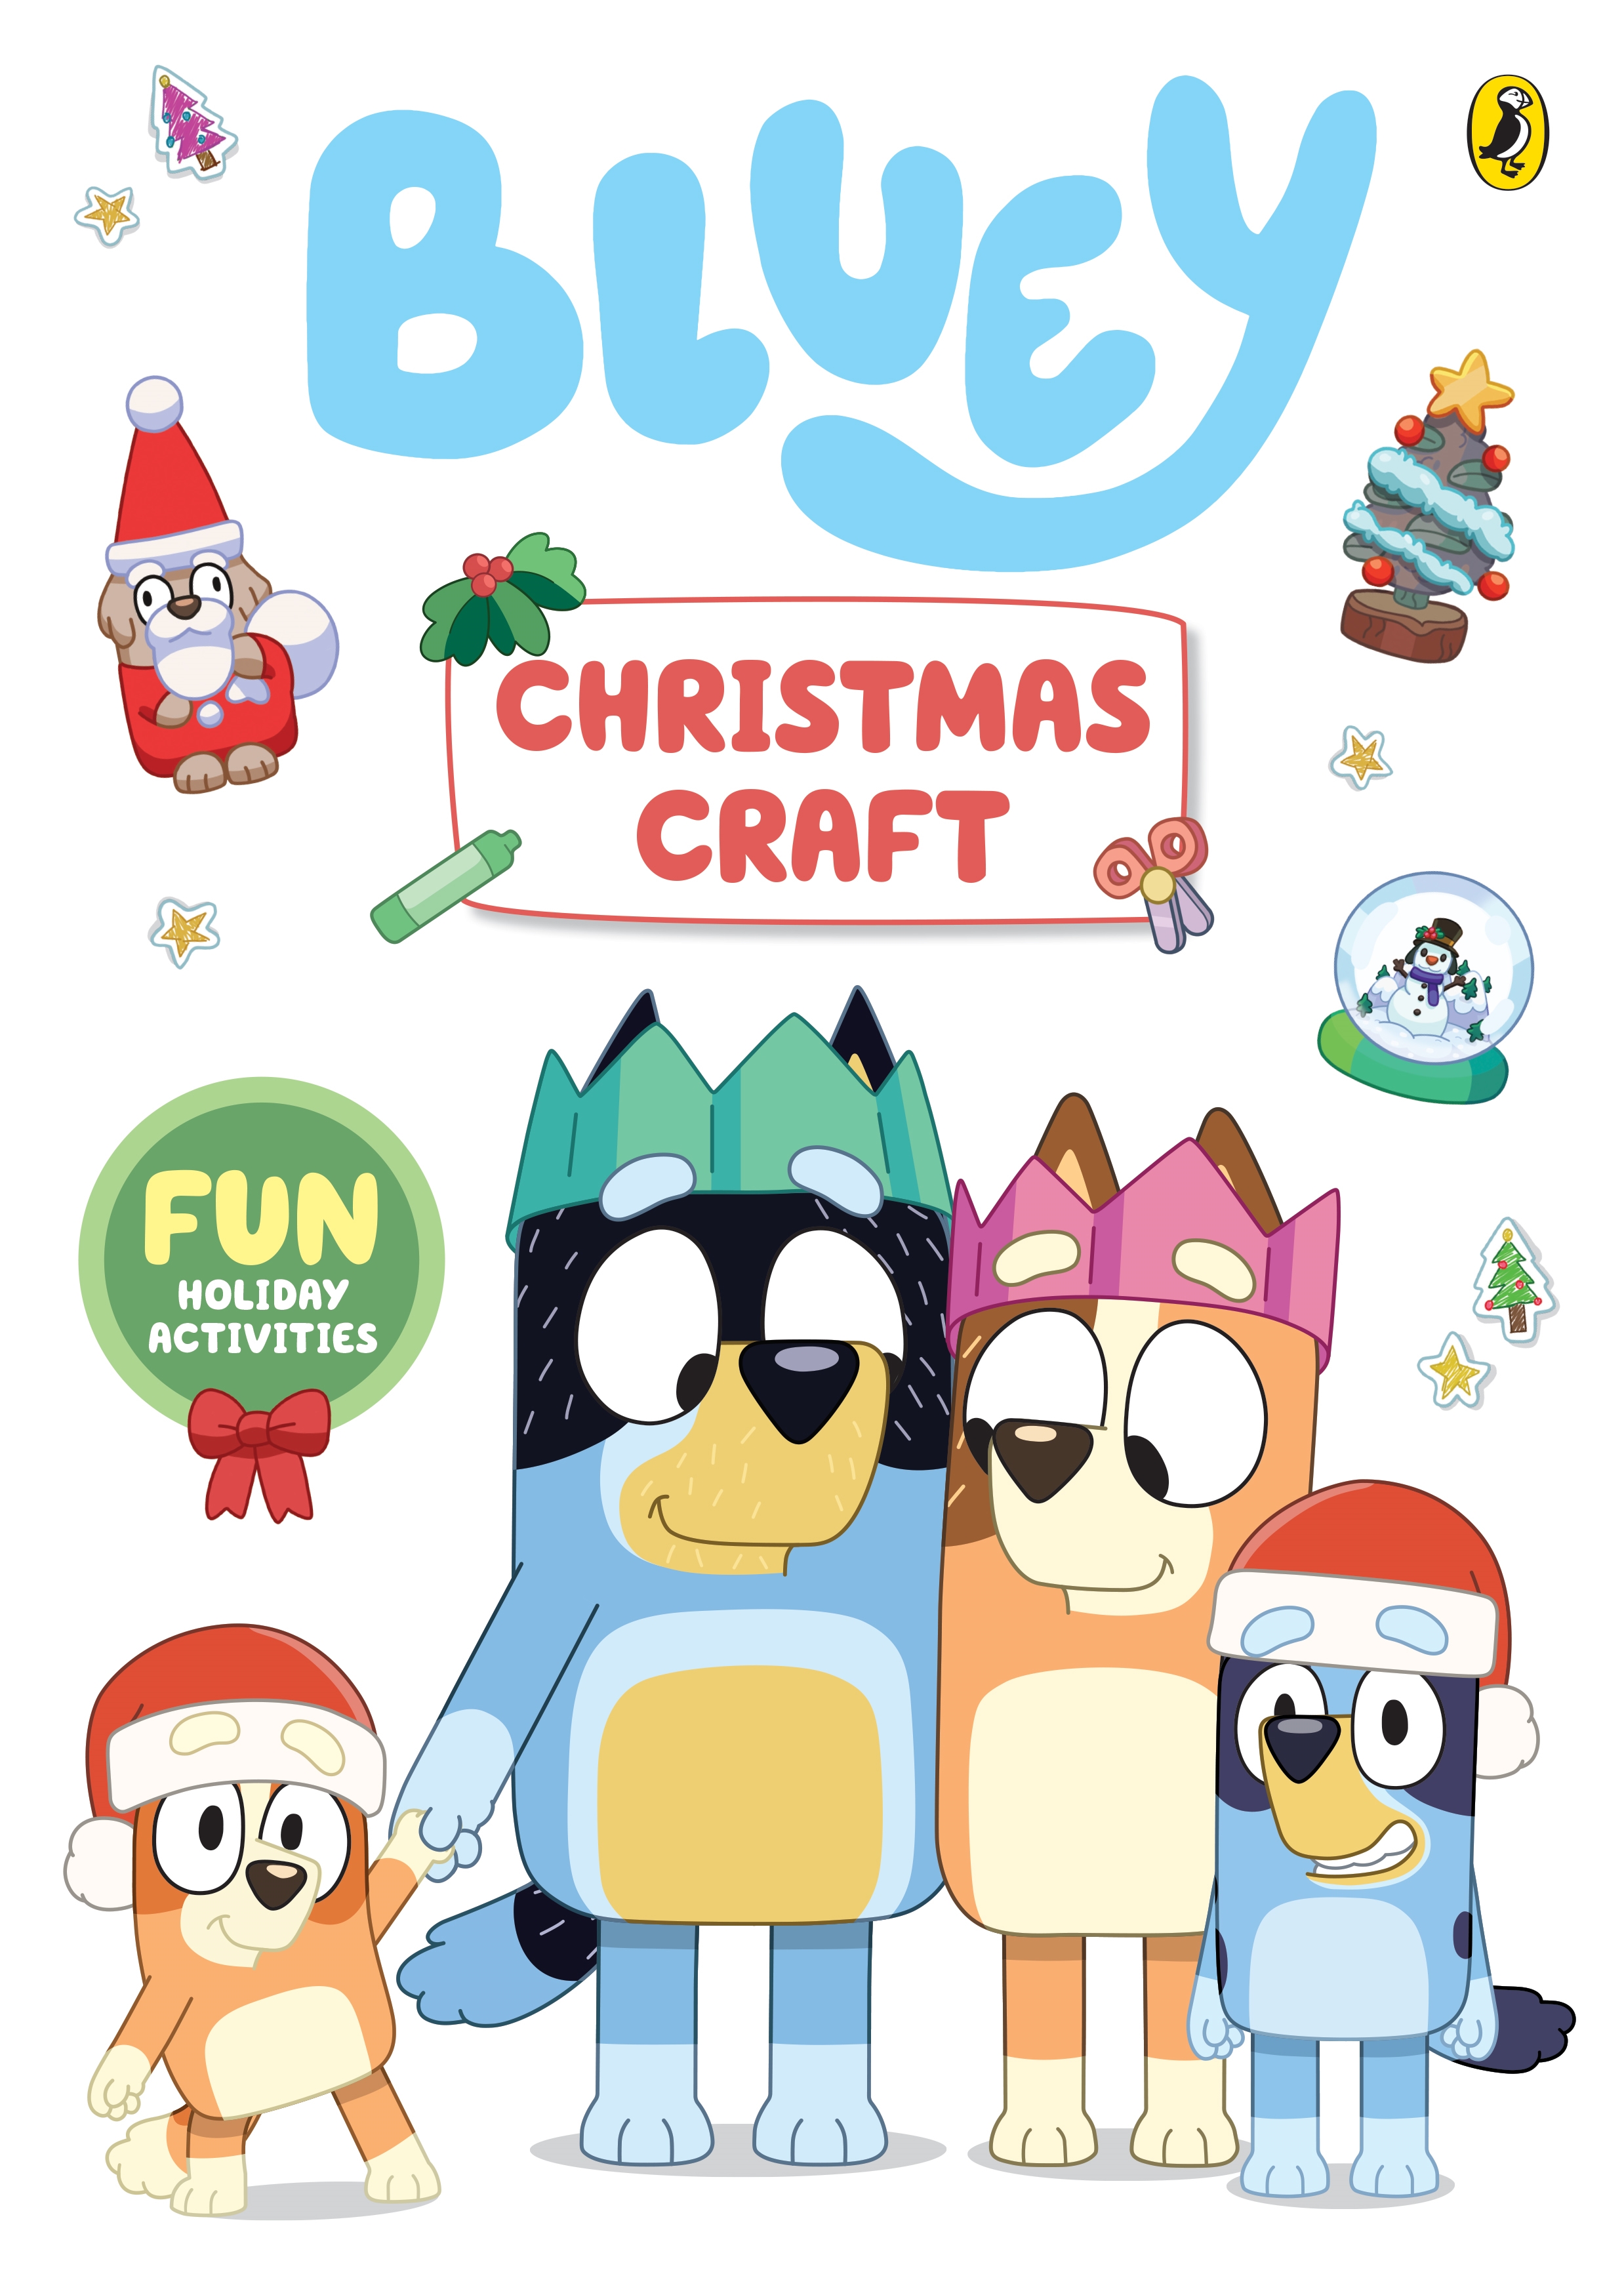 Bluey: Time to Play!: A Sticker & Activity Book (Paperback)